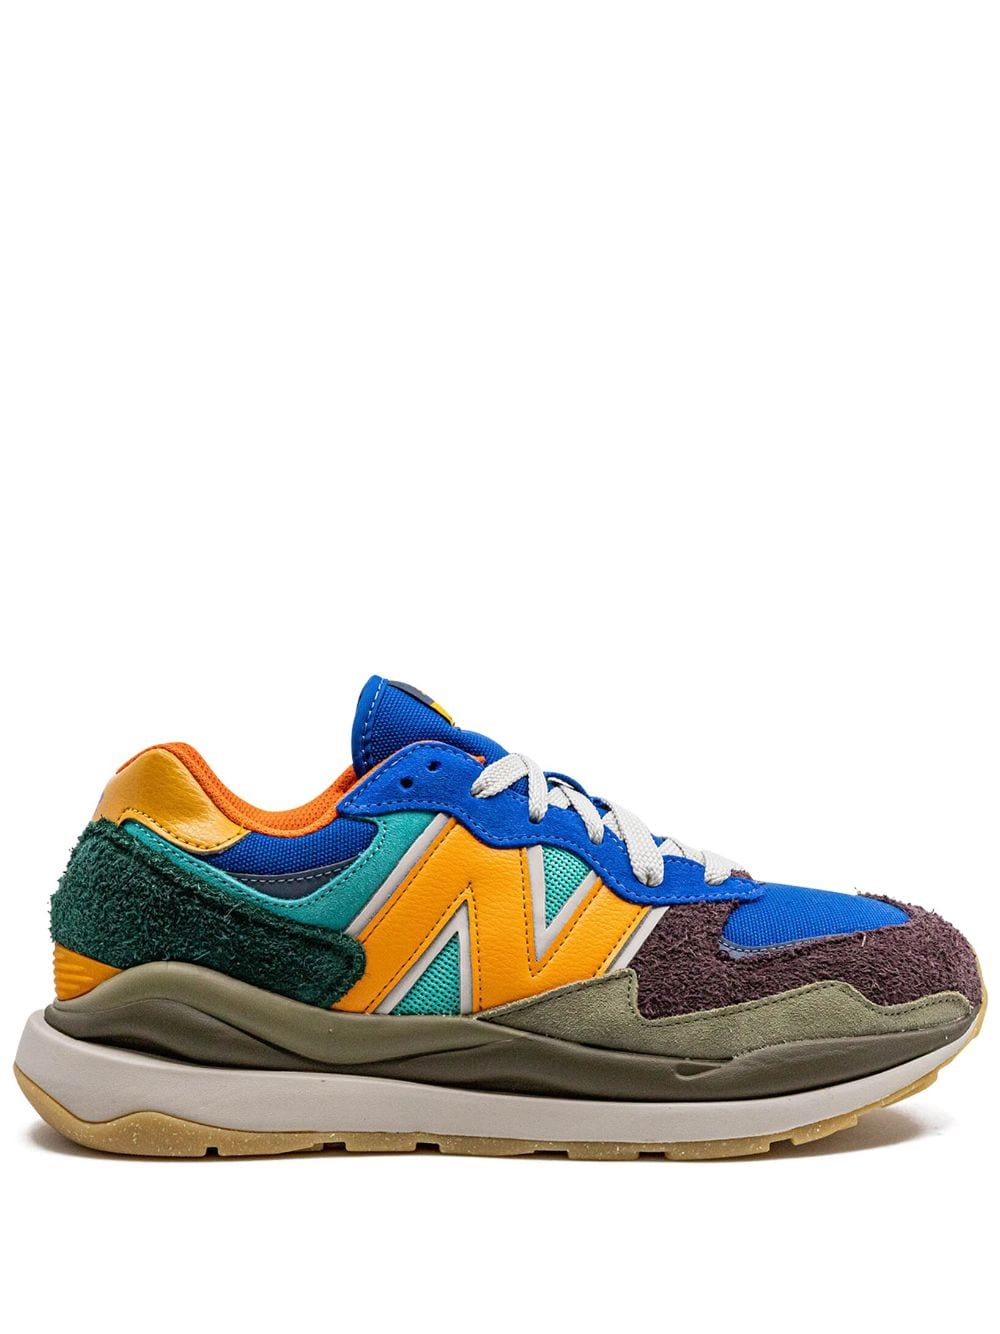 New Balance 57/40 "cobalt/marigold" Trainers In Blue